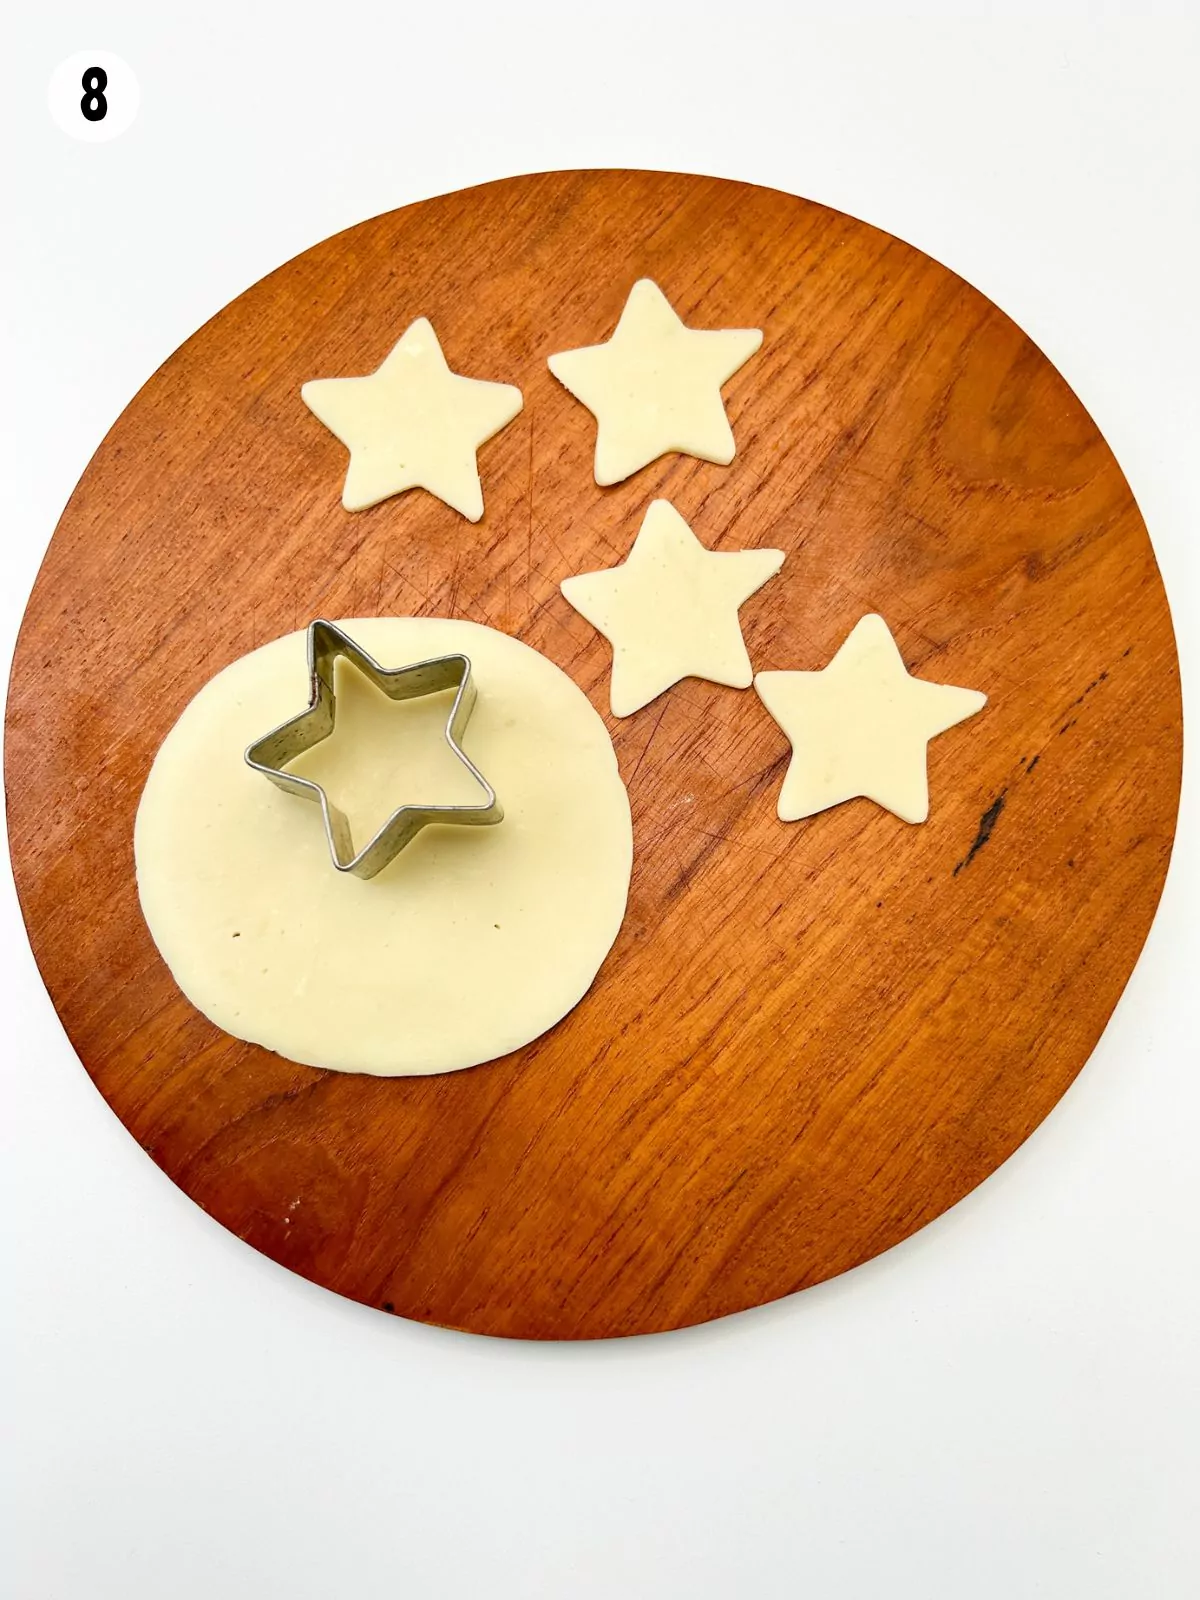 slice of cheese on cutting board with star shape cookie cutter.